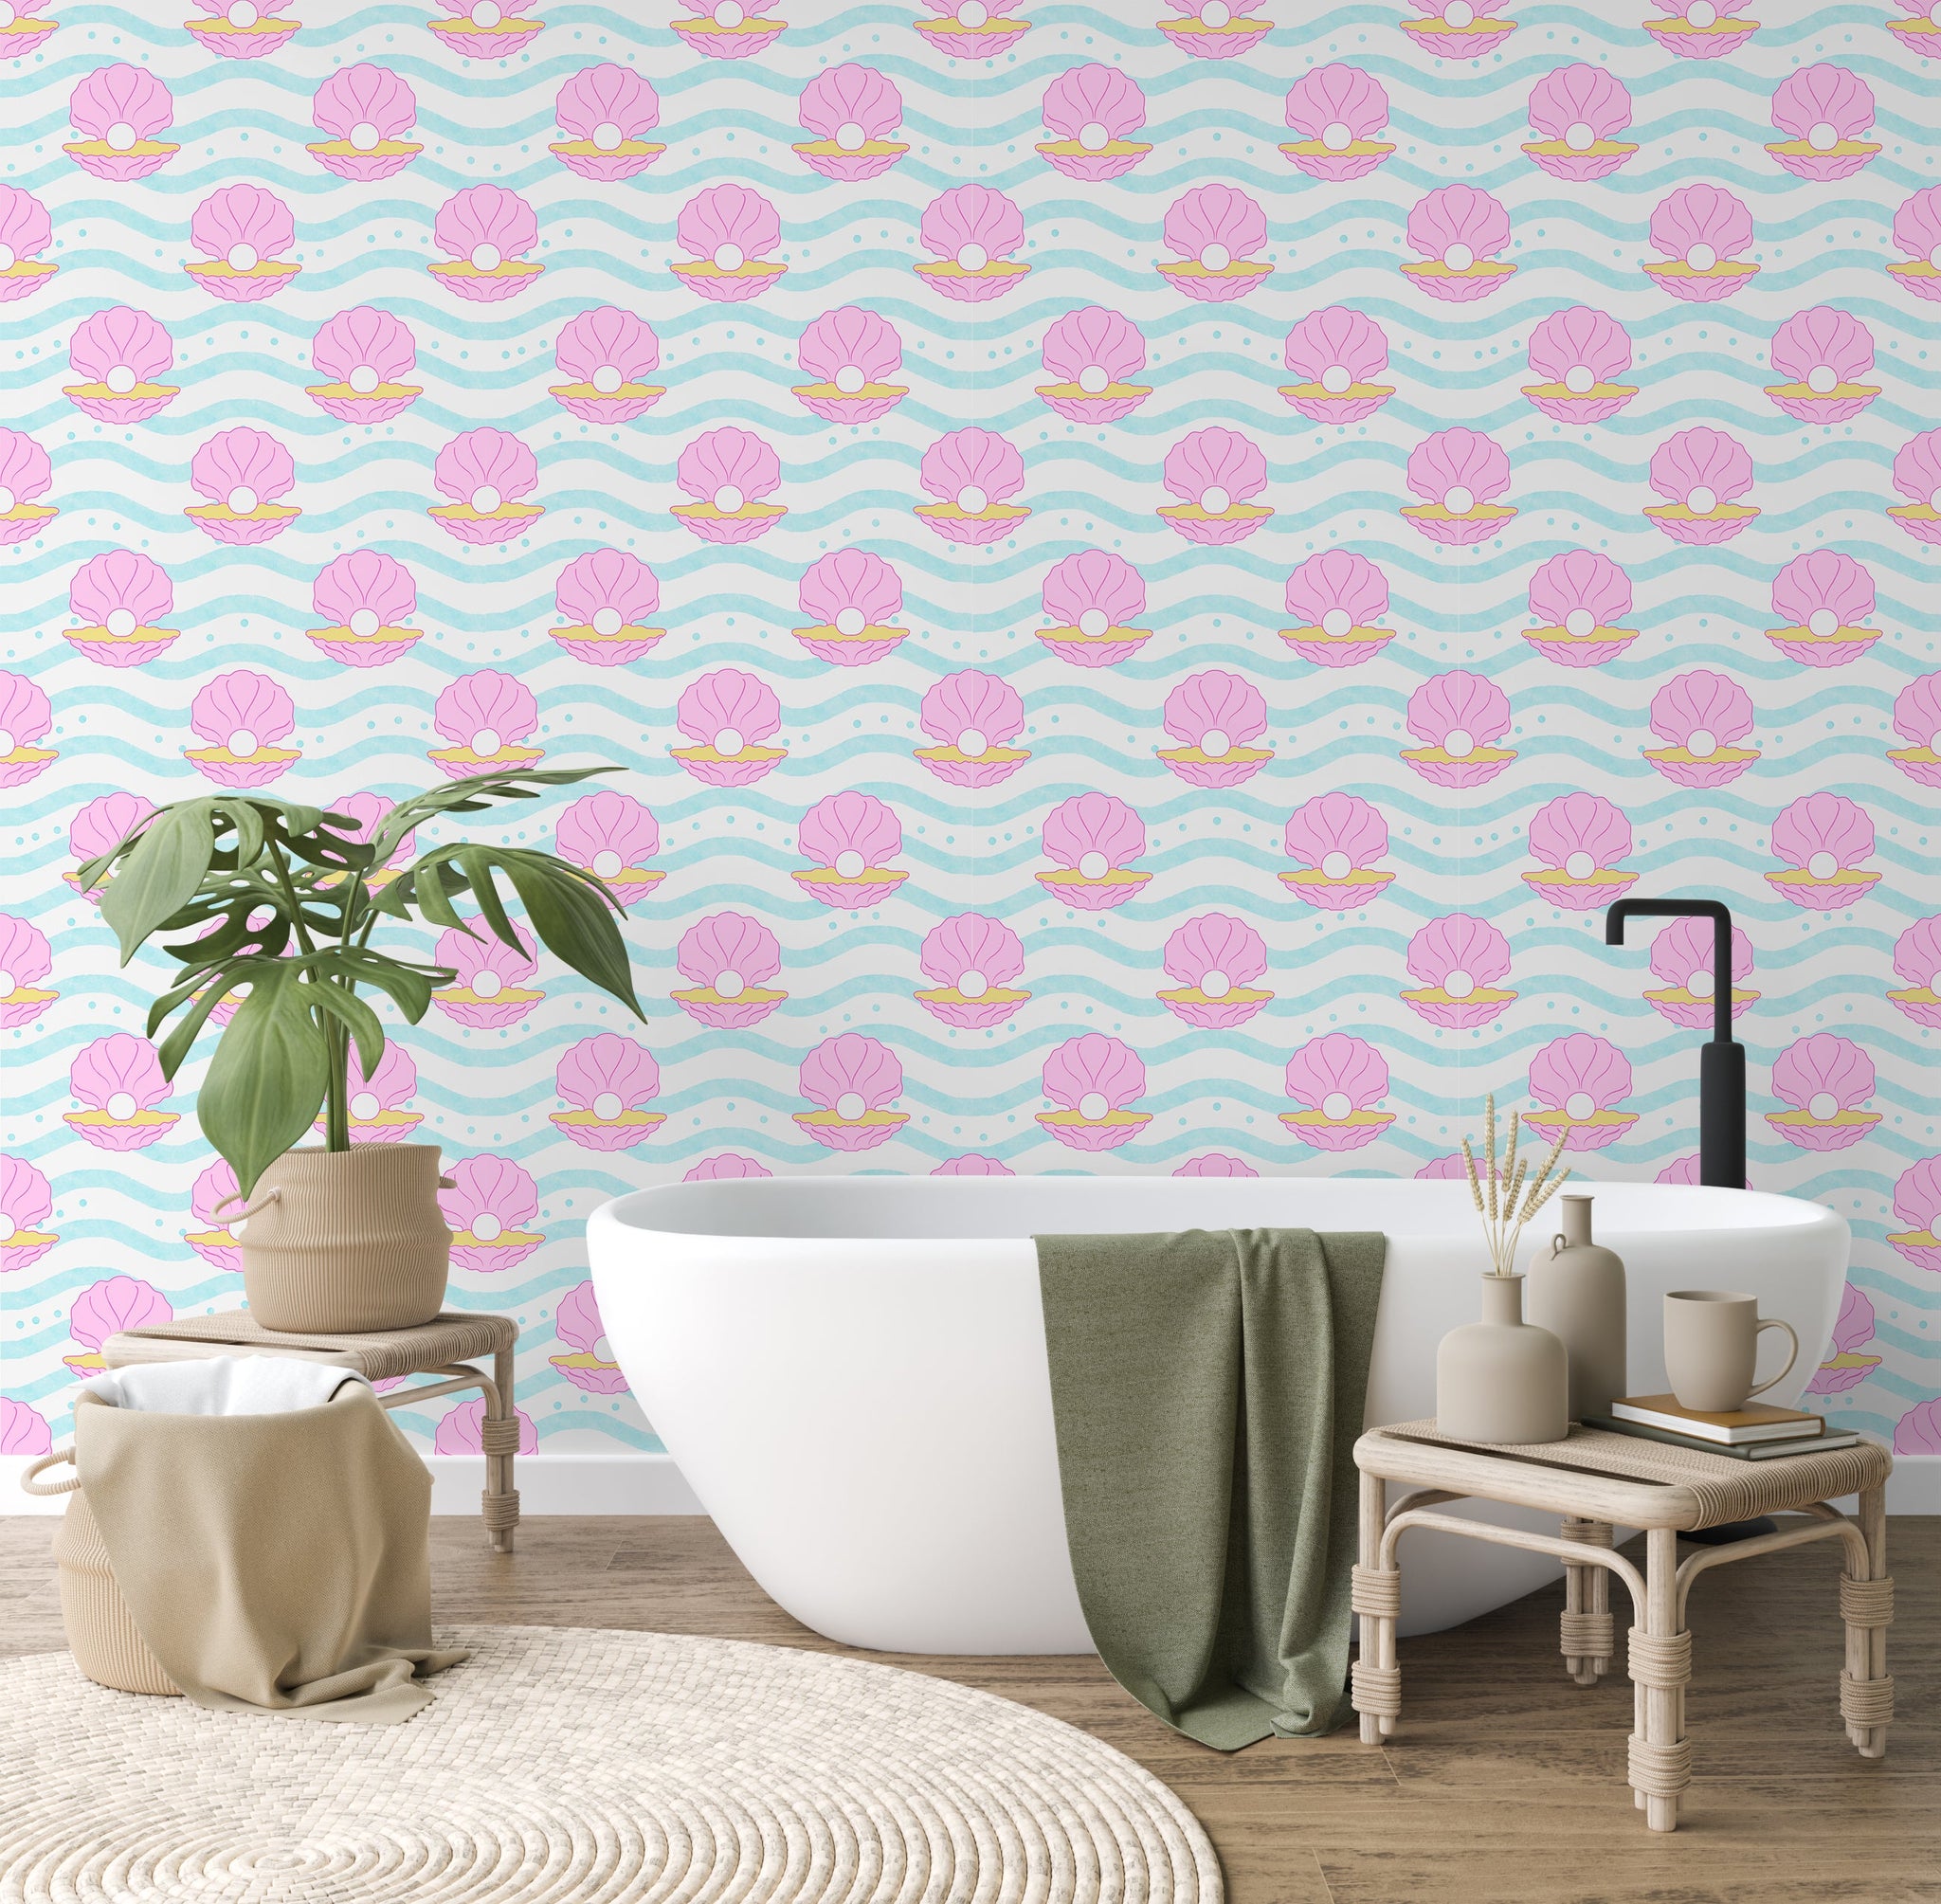 Gems of the Sea Wallpaper in Calm Blue, Pink and Yellow - firstorganicbaby